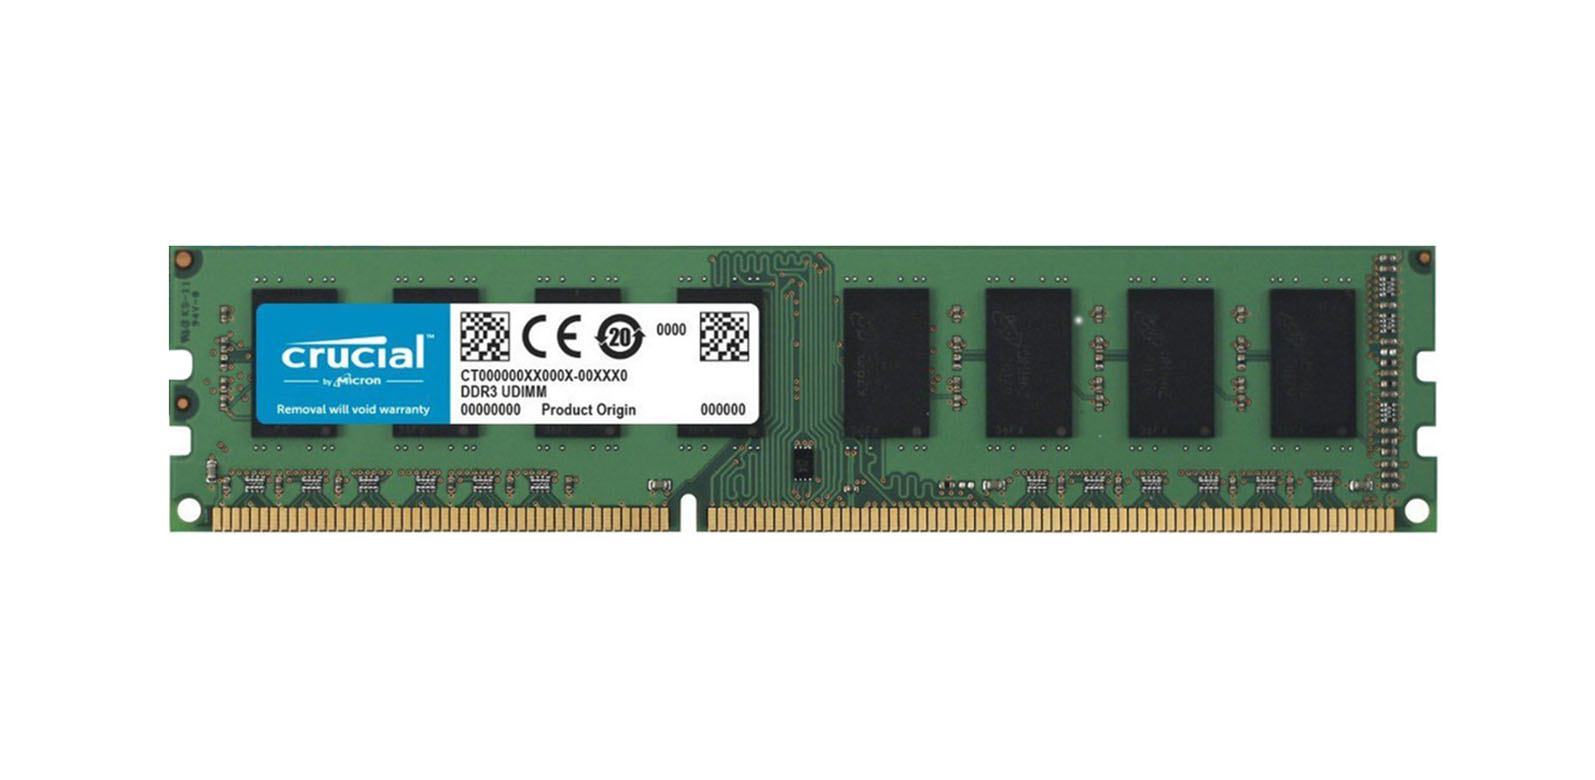 Crucial CT5174009 8GB DDR3-1600MHz PC3-12800 ECC Registered CL11 240-Pin DIMM 1.35V Low Voltage Dual Rank Very Low Profile (VLP) Memory Module upgrade for Tyan S7063WGM2NR-1T